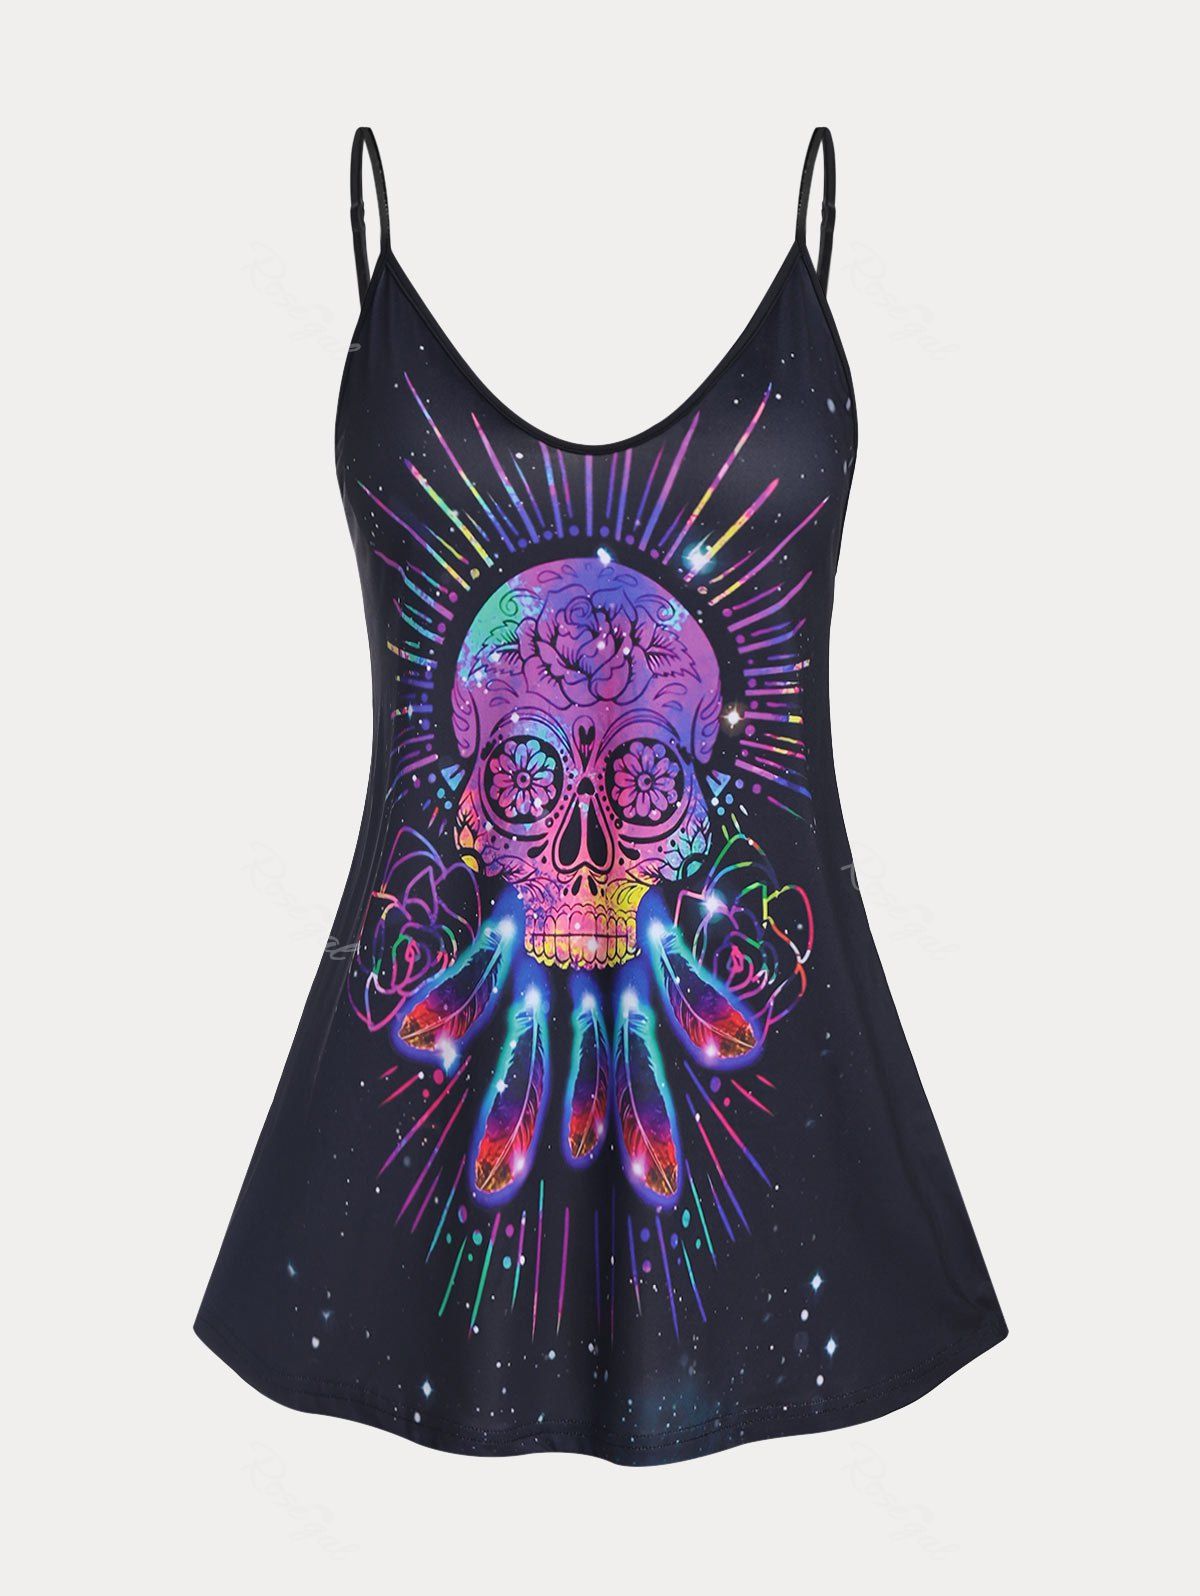 Outfits Plus Size & Curve Rainbow Skull Print Gothic Tank Top (Adjustable Straps)  